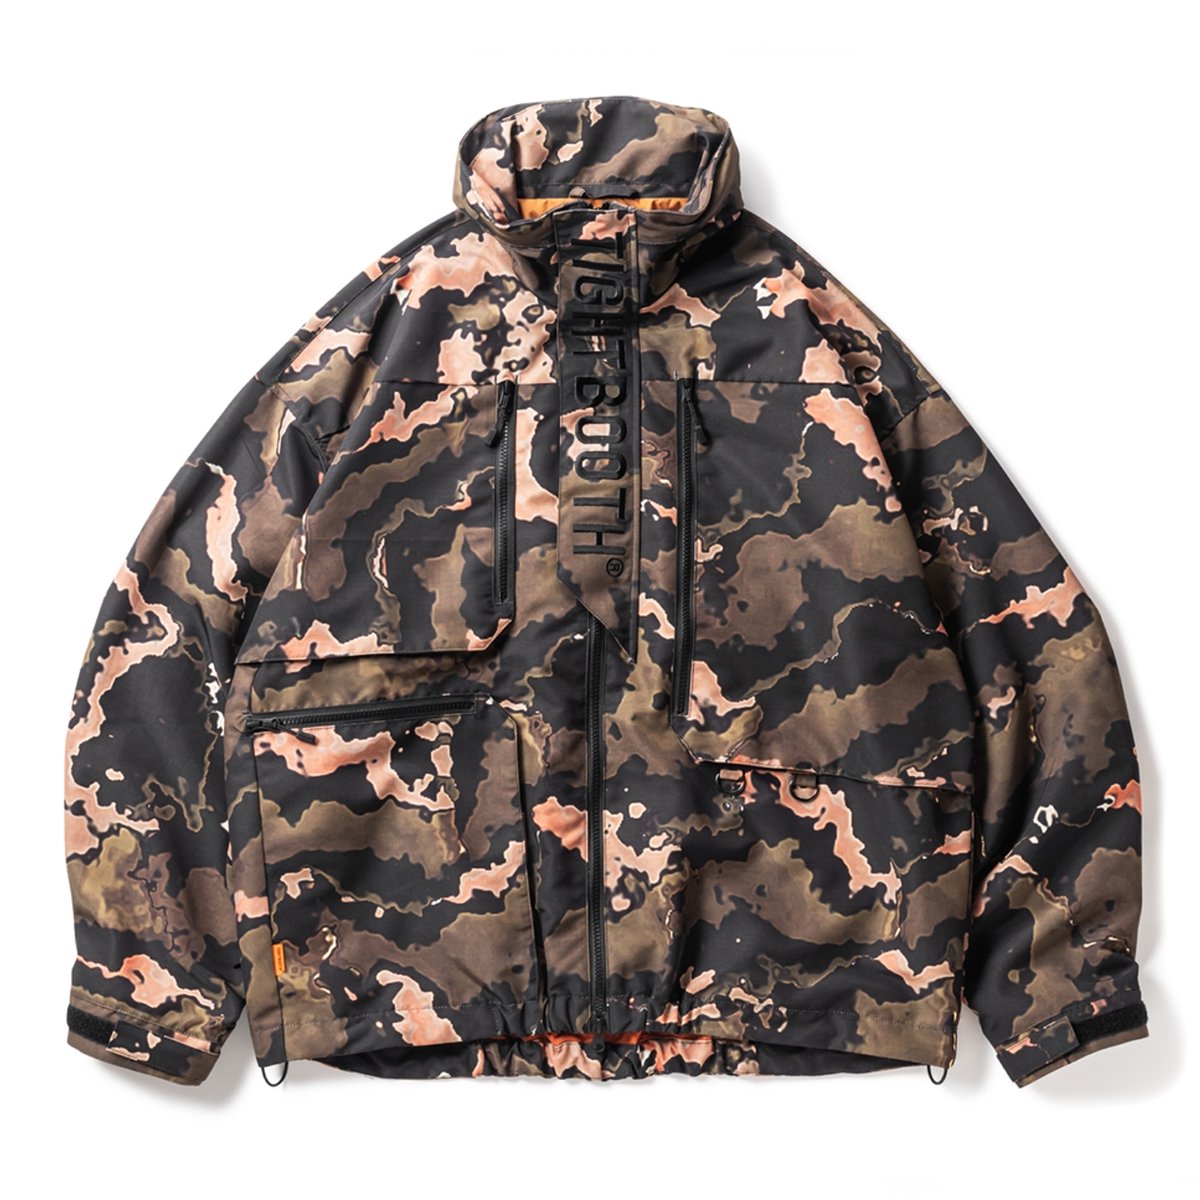 TIGHTBOOTH】Ripstop Tactical JKT (Orange Camo)- LIEON SHARE 